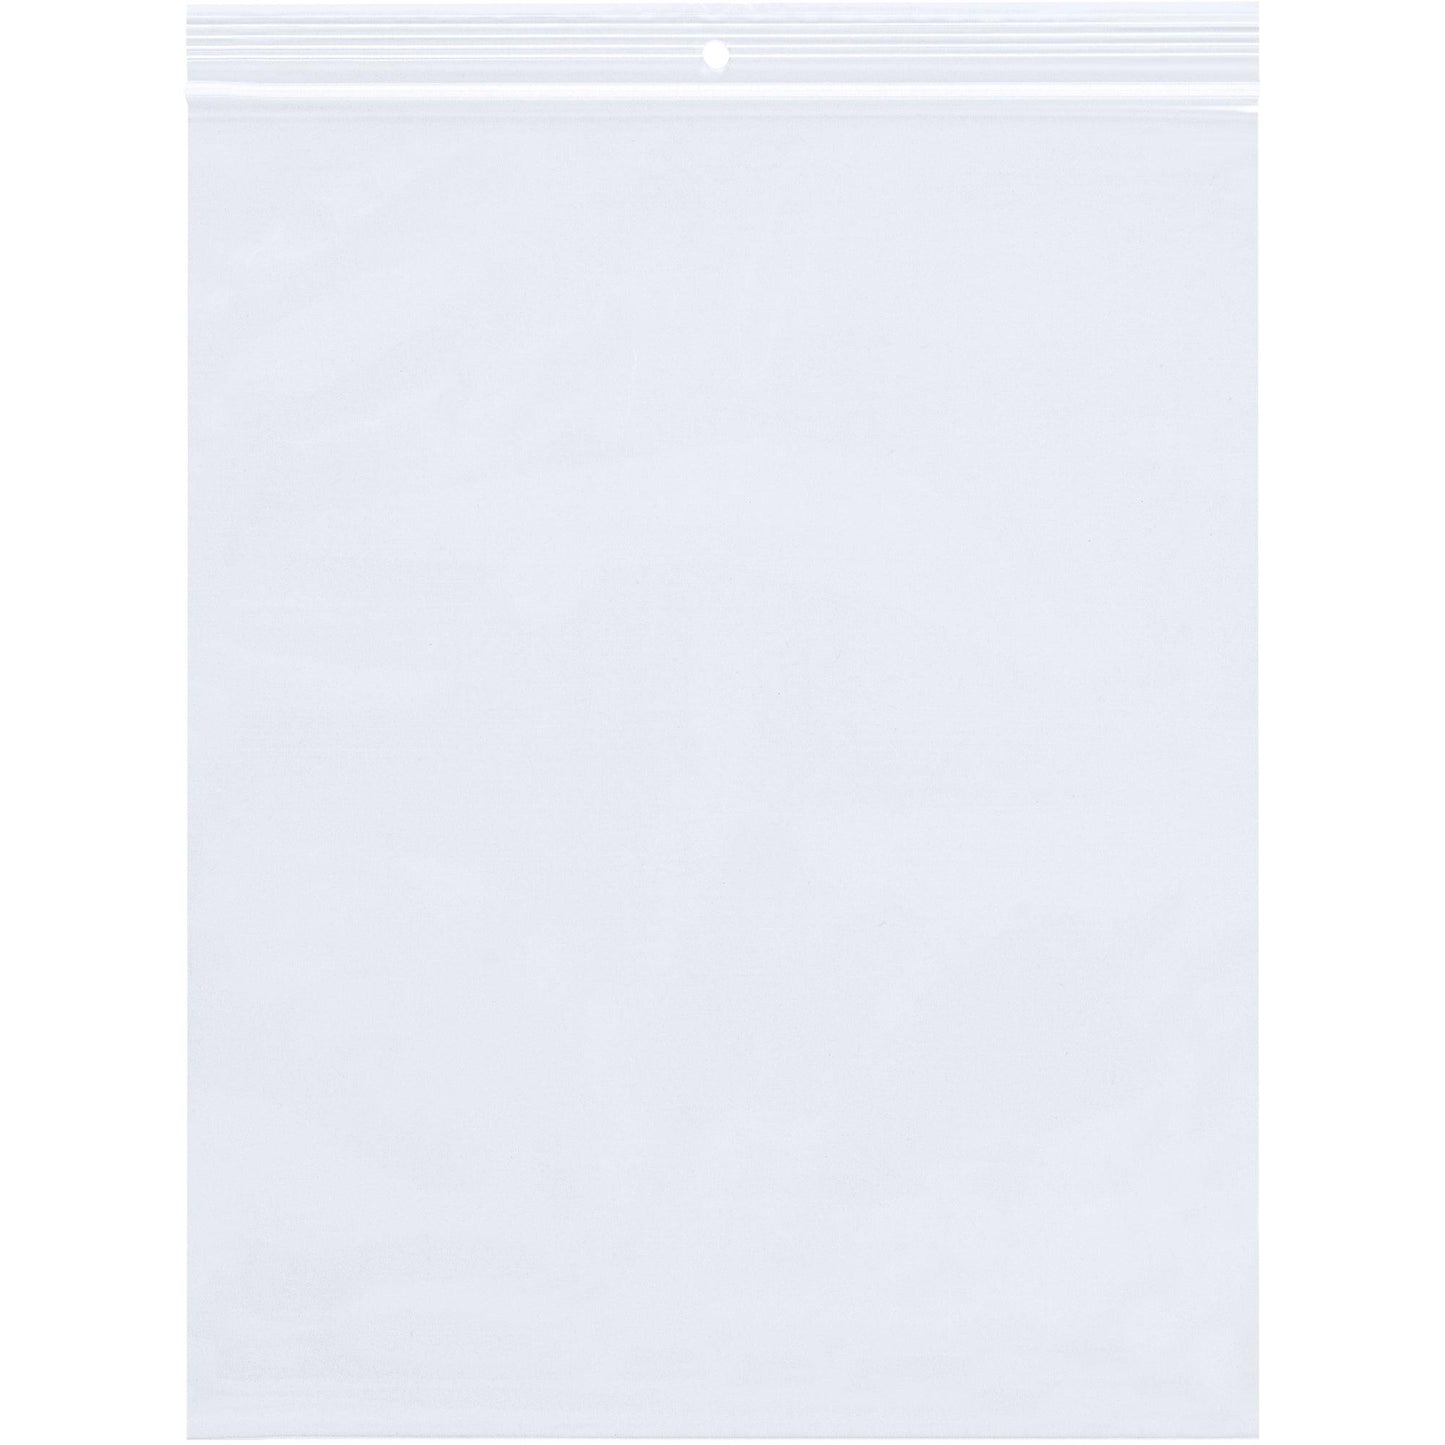 12 x 15" - 2 Mil Reclosable Poly Bags w/ Hang Hole - PB6729